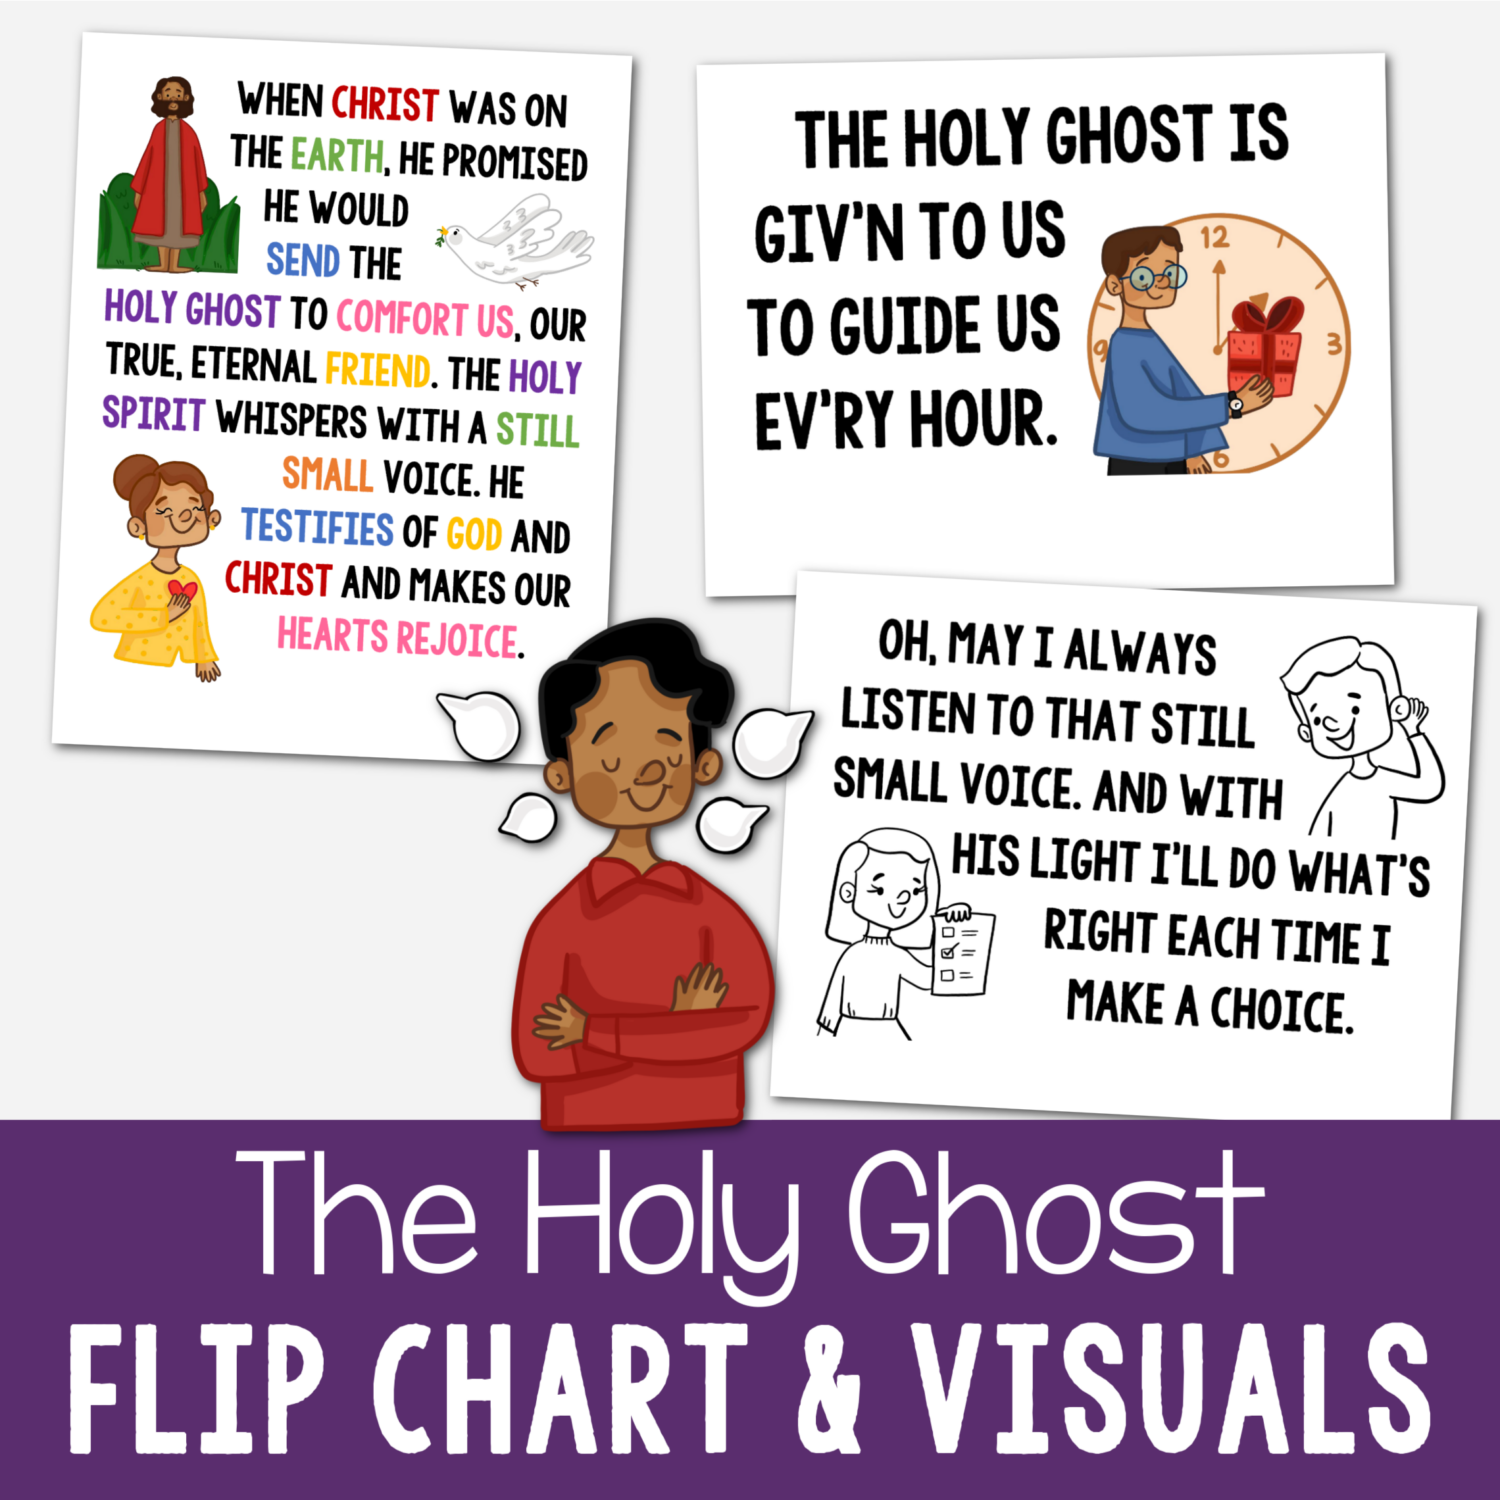 The Holy Ghost Flip Chart singing time song helps with visual aids to teach this LDS Primary song for music leaders.